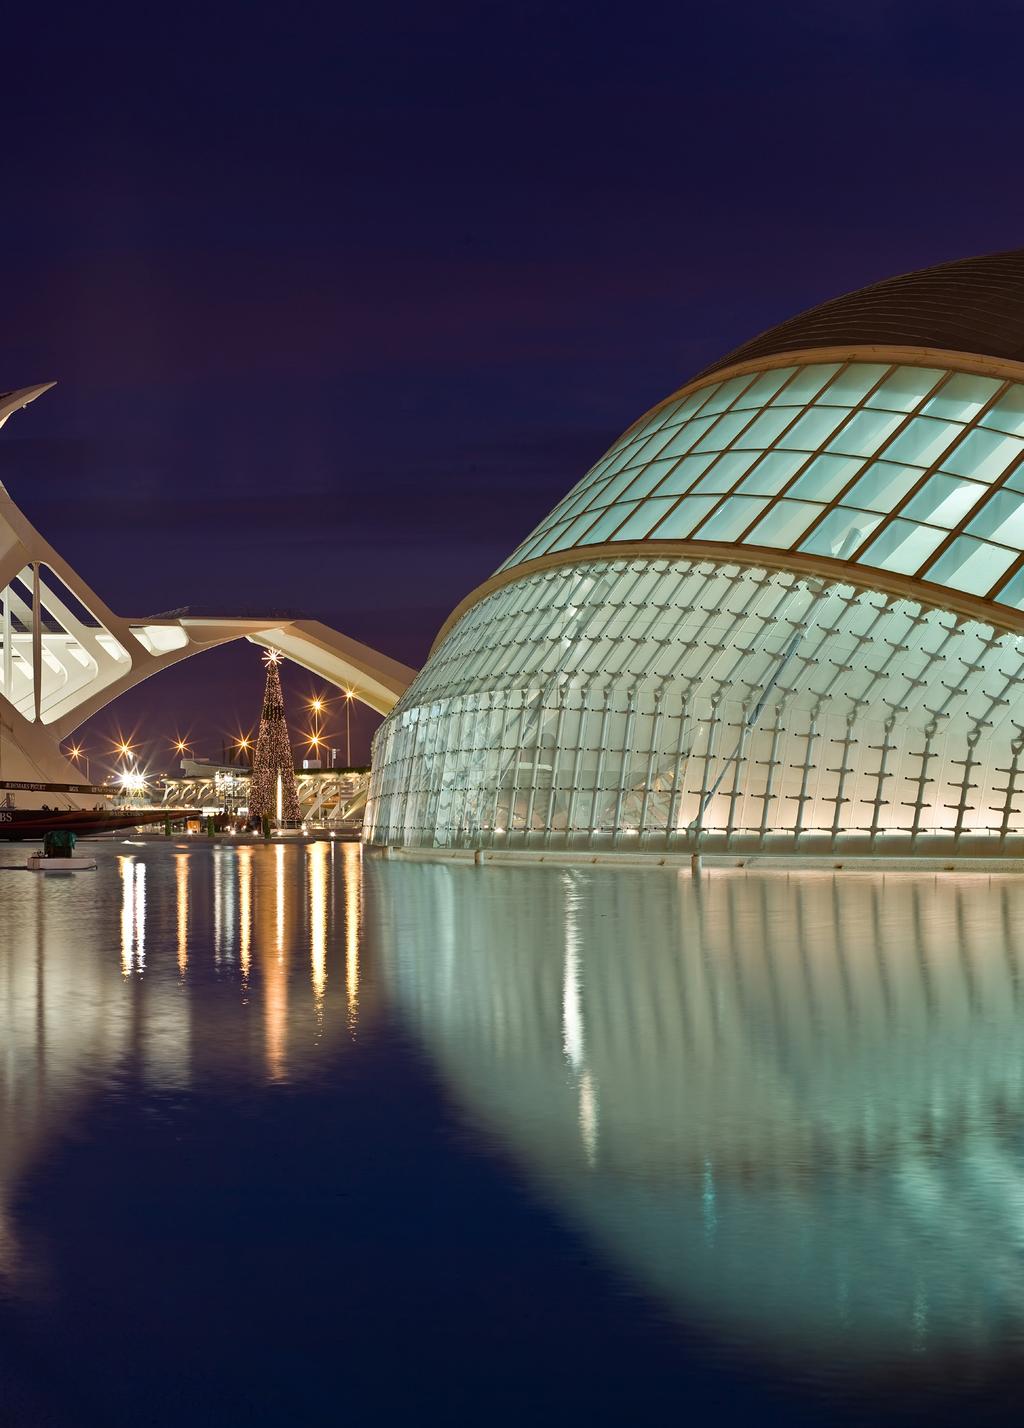 VALENCIA, SPAIN There are few cities like Valencia, able to harmoniously combine the remnants of its farthest past, dating to the year 138 BC, with the most innovative and avant-garde buildings from